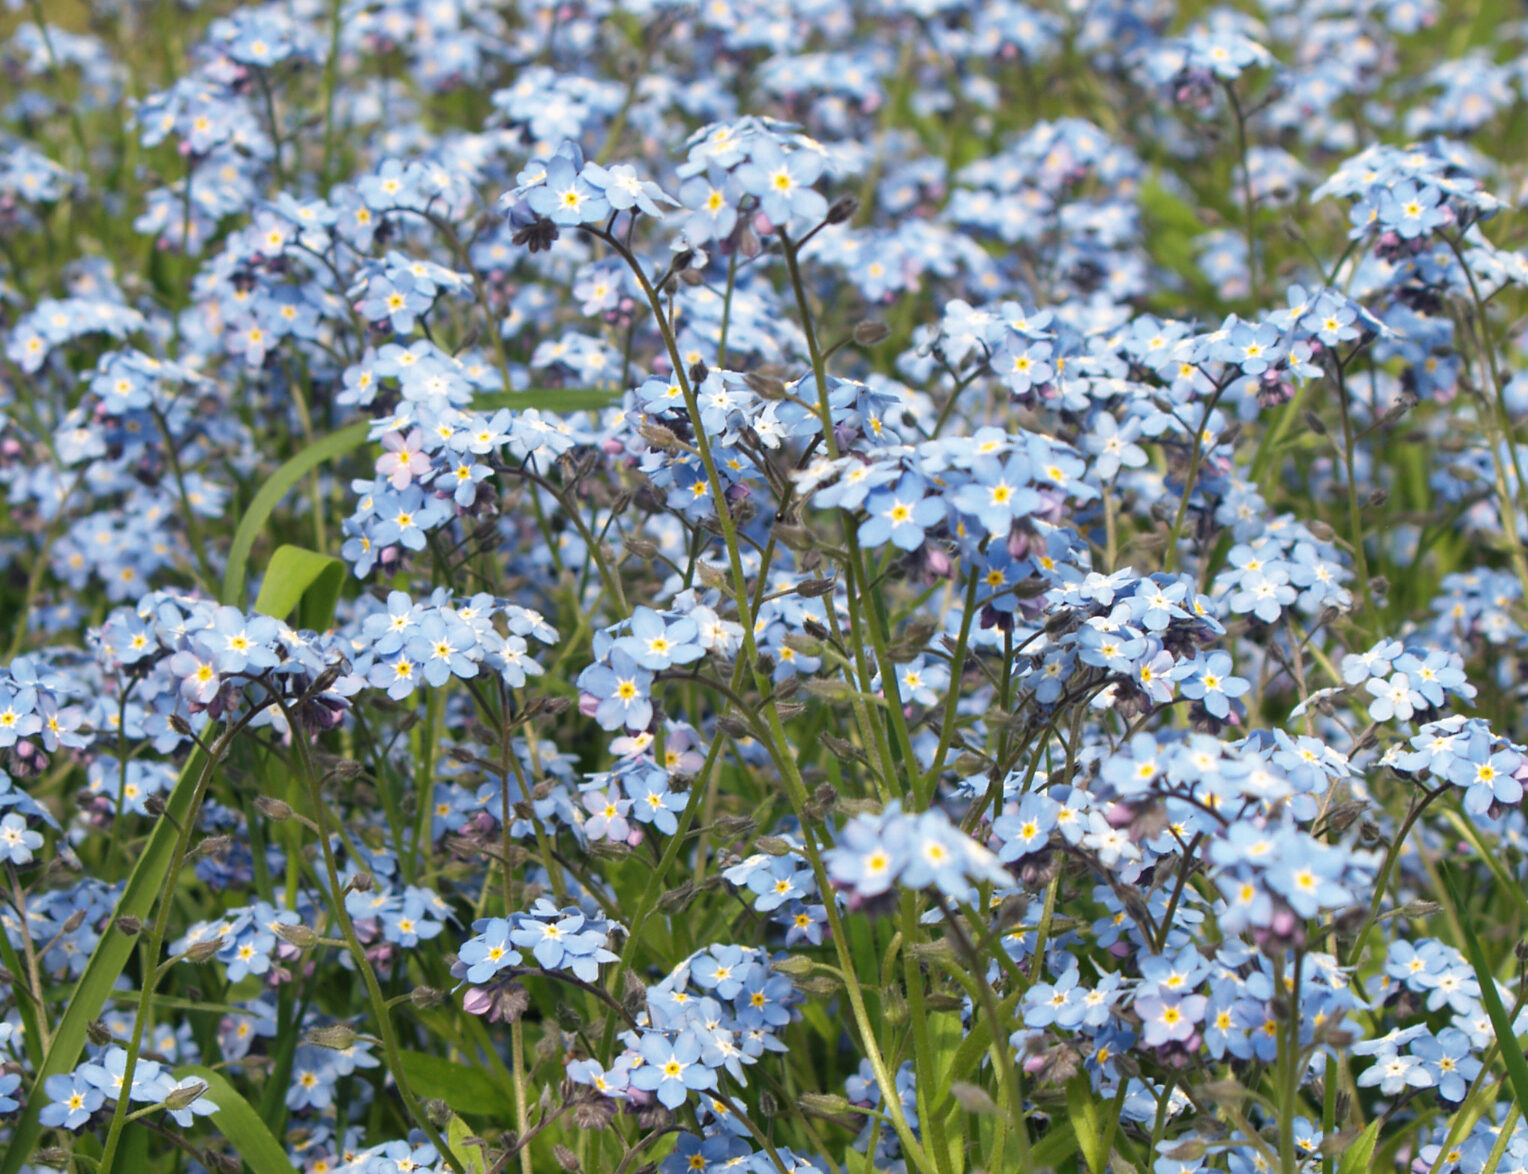 Day of Polish Forget-me-not: An Annual Festival Embracing Nature's Beauty and Conservation